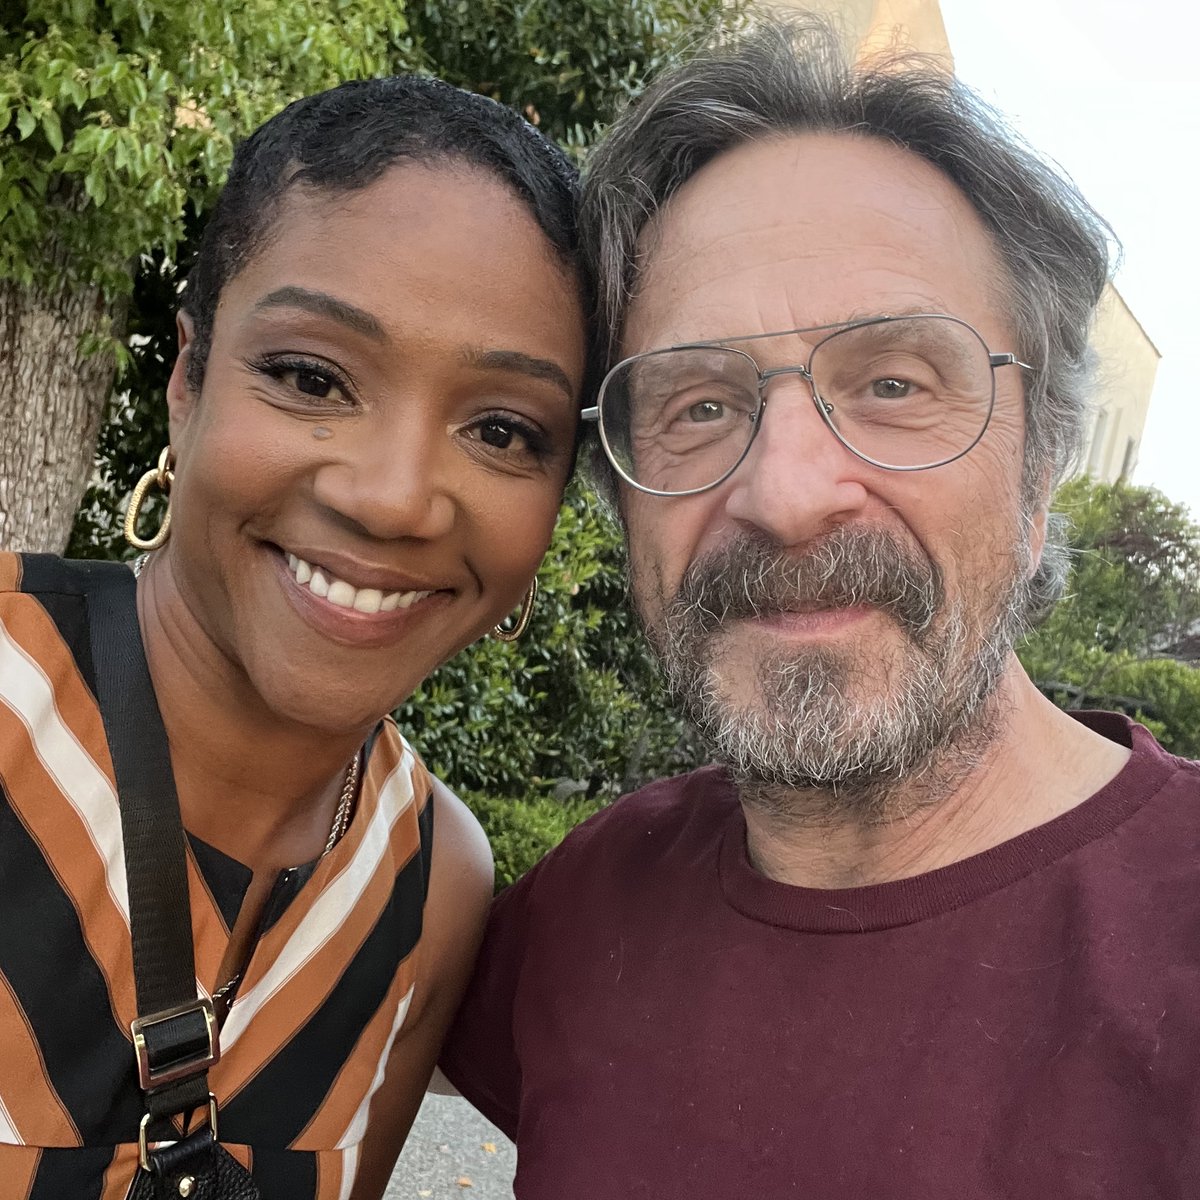 Today is @TiffanyHaddish day on wtfpod.com! I Curse You With Joy, comedy camp, foster care, Girls Trip, navigating fame! Good talk. Listen up! Episode hosted by @acast - wtfpod.com/podcast/episod… On @ApplePodcasts - podcasts.apple.com/us/podcast/epi…